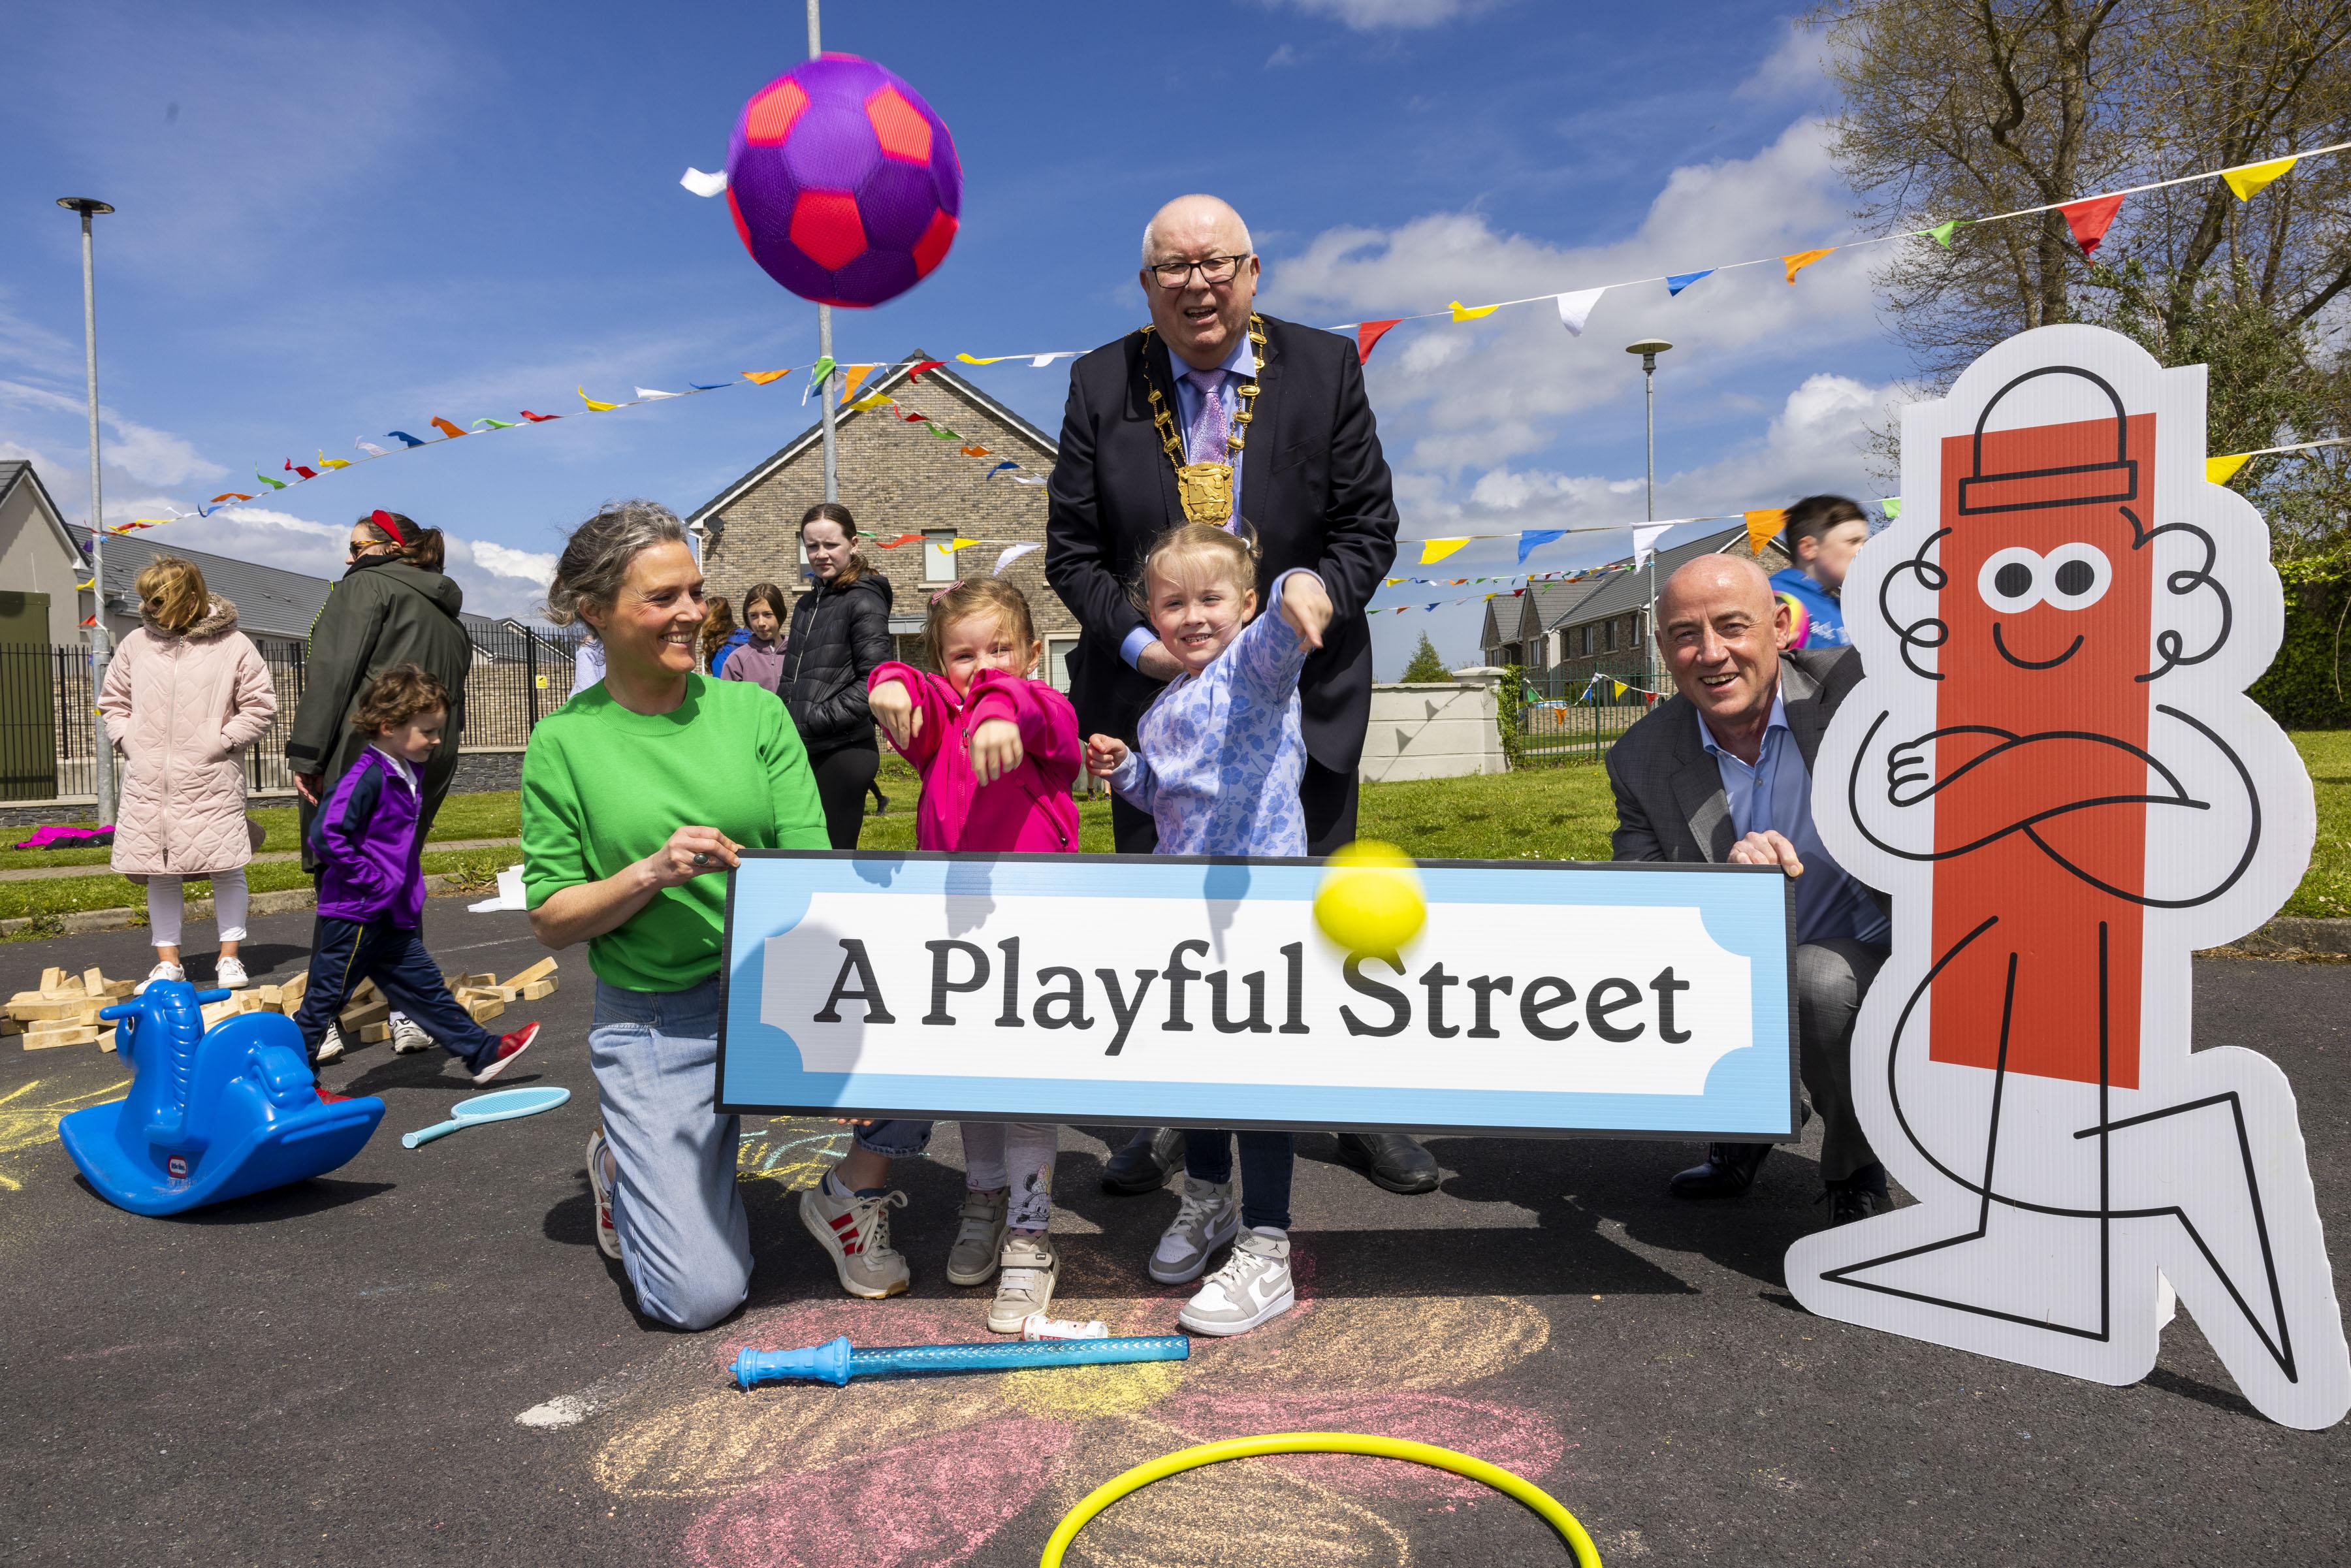 Playful Streets are being encouraged across Fingal